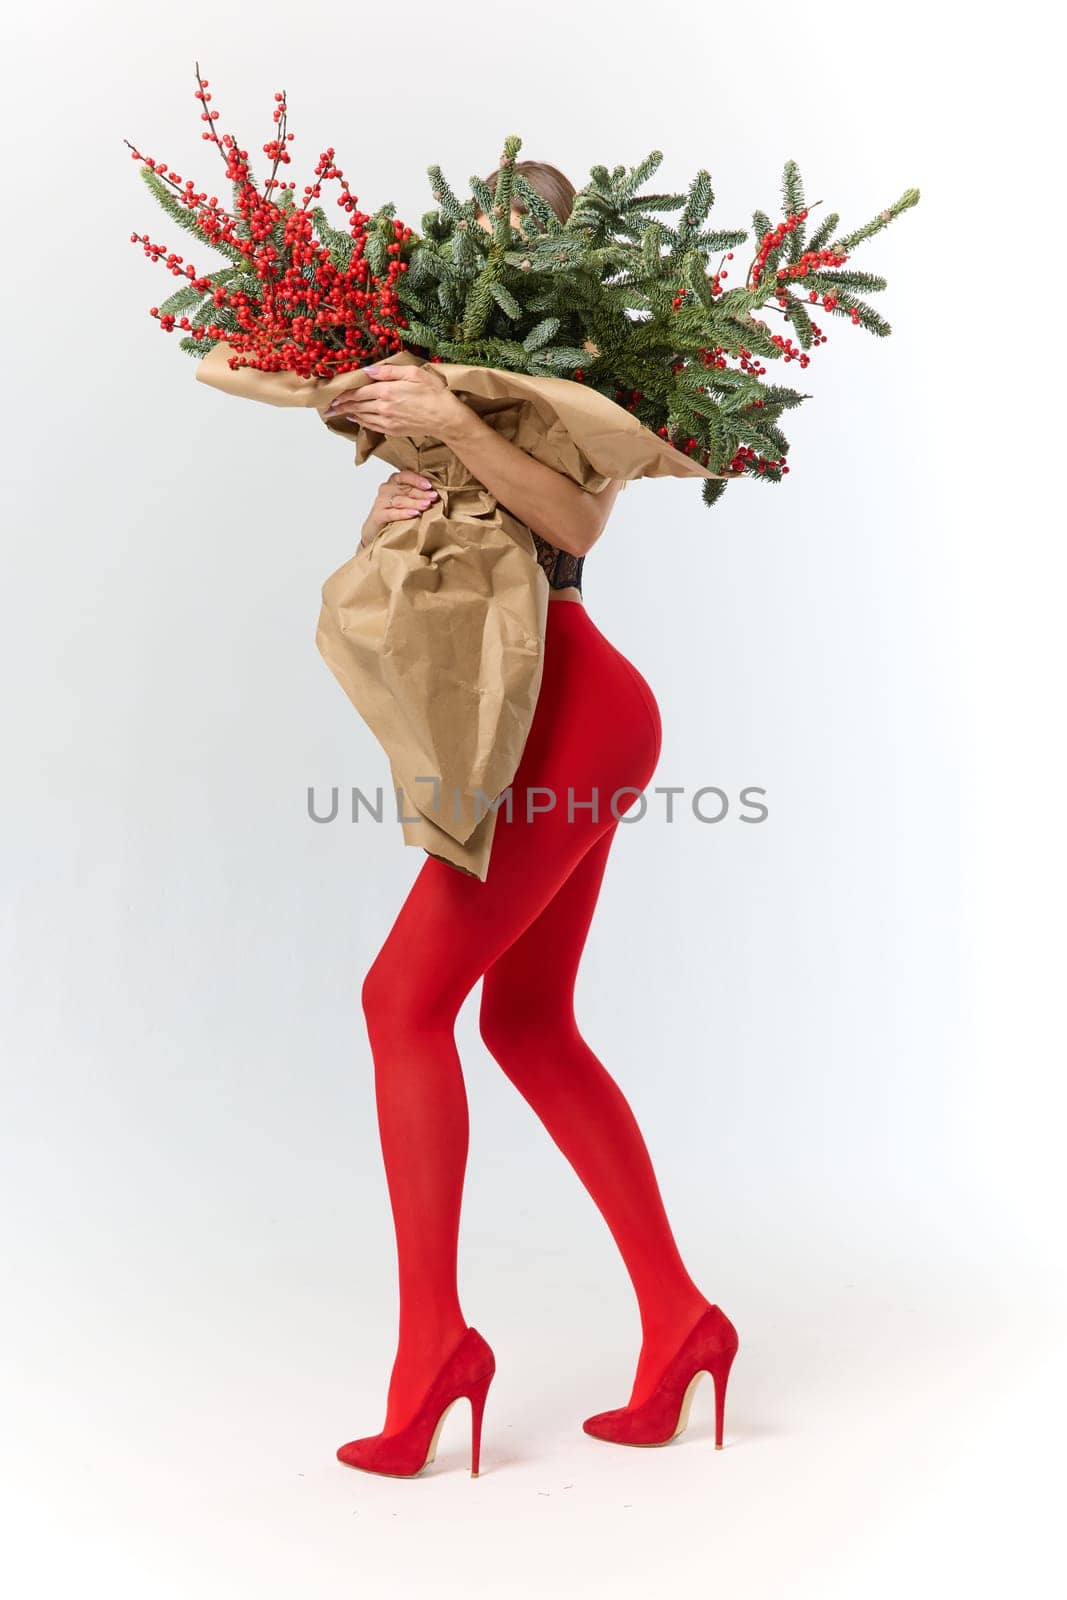 A long girl in red tights and high-heeled shoes holds a huge bouquet of fir branches and red berries wrapped in cardboard paper, she closes with a bouquet, photo studio with white background by vladimirdrozdin